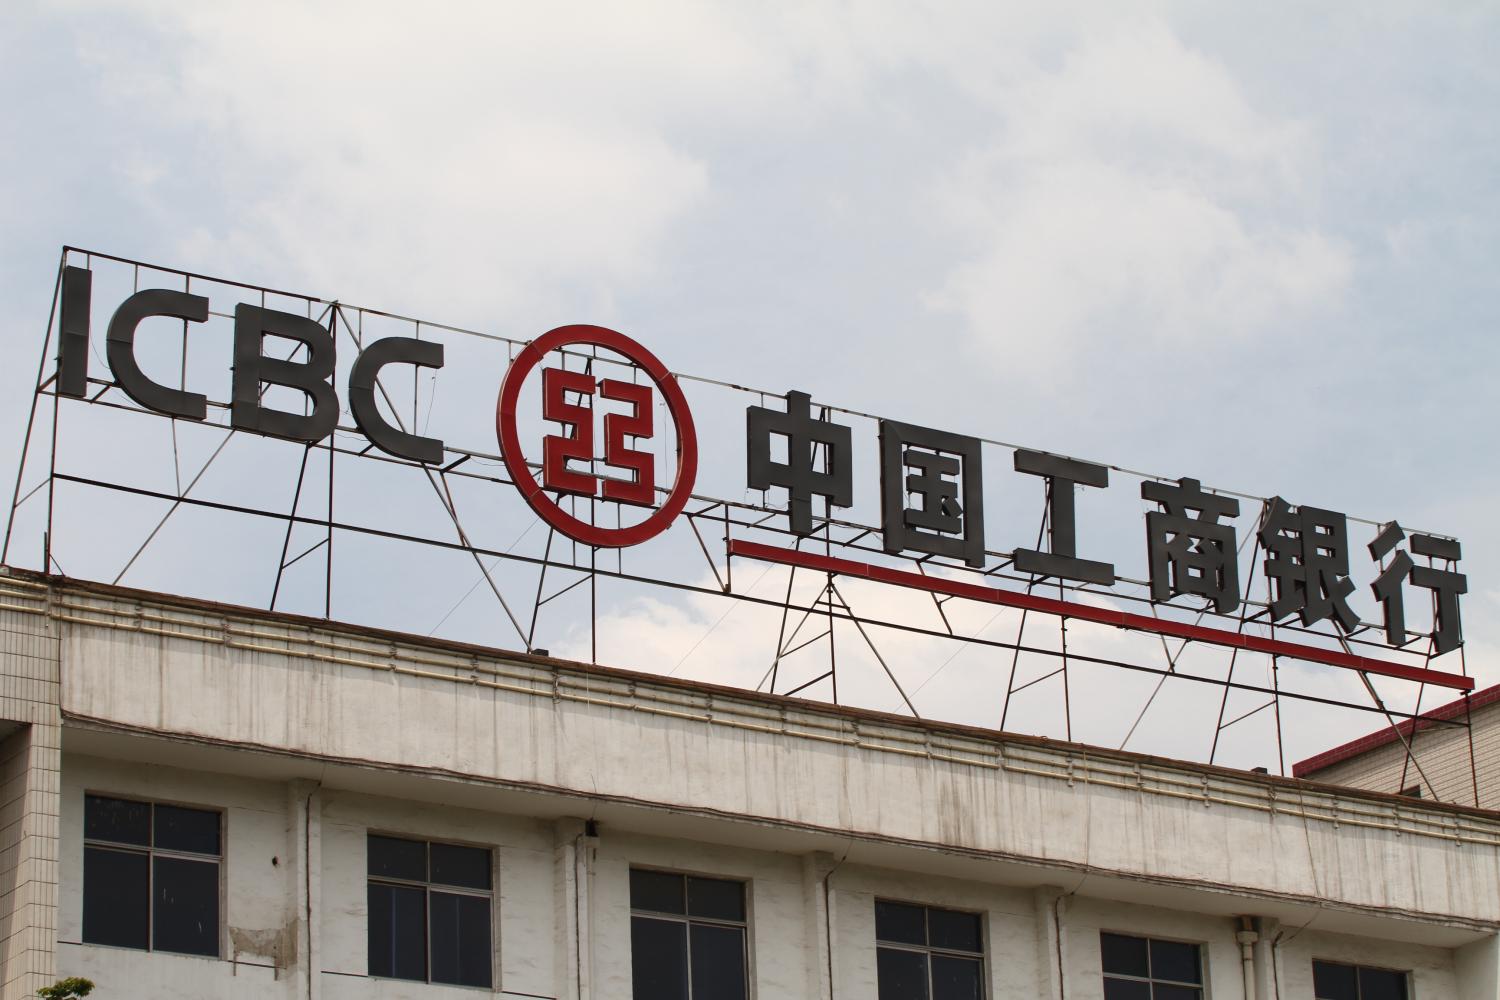 --FILE--View of a signboard of ICBC (Industrial and Commercial Bank of China) in Xuchang city, central China's Henan province, 22 May 2016.The Industrial and Commercial Bank of China (ICBC), the world's biggest in terms of capital and deposit, on Thursday voiced its readiness to continue its "all-round" financial services for "Belt and Road" projects. "ICBC is keen and active in promoting the Belt and Road Initiative," said Gu Shu, ICBC's senior executive vice president. The initiative, which comprises the Silk Road Economic Belt and the 21st Century Maritime Silk Road, is aiming at building a trade and infrastructure network connecting Asia with Europe and Africa along the ancient Silk Road routes. "ICBC has 123 branches in 18 countries along the Belt and Road, making it the Chinese financial institution that covers the most countries along the route," Gu said. "ICBC has been actively providing all-round and integrated financial services for 'Belt and Road' projects," he added. "So far, ICBC has operated 208 projects along the route, with a combined investment of 220.8 billion U.S. dollars." Gu was in Istanbul for the first anniversary of the inauguration of ICBC Turkey, which was established after ICBC purchased a majority of shares of Turkey's Tekstilbank in May last year.No Use China. No Use France.